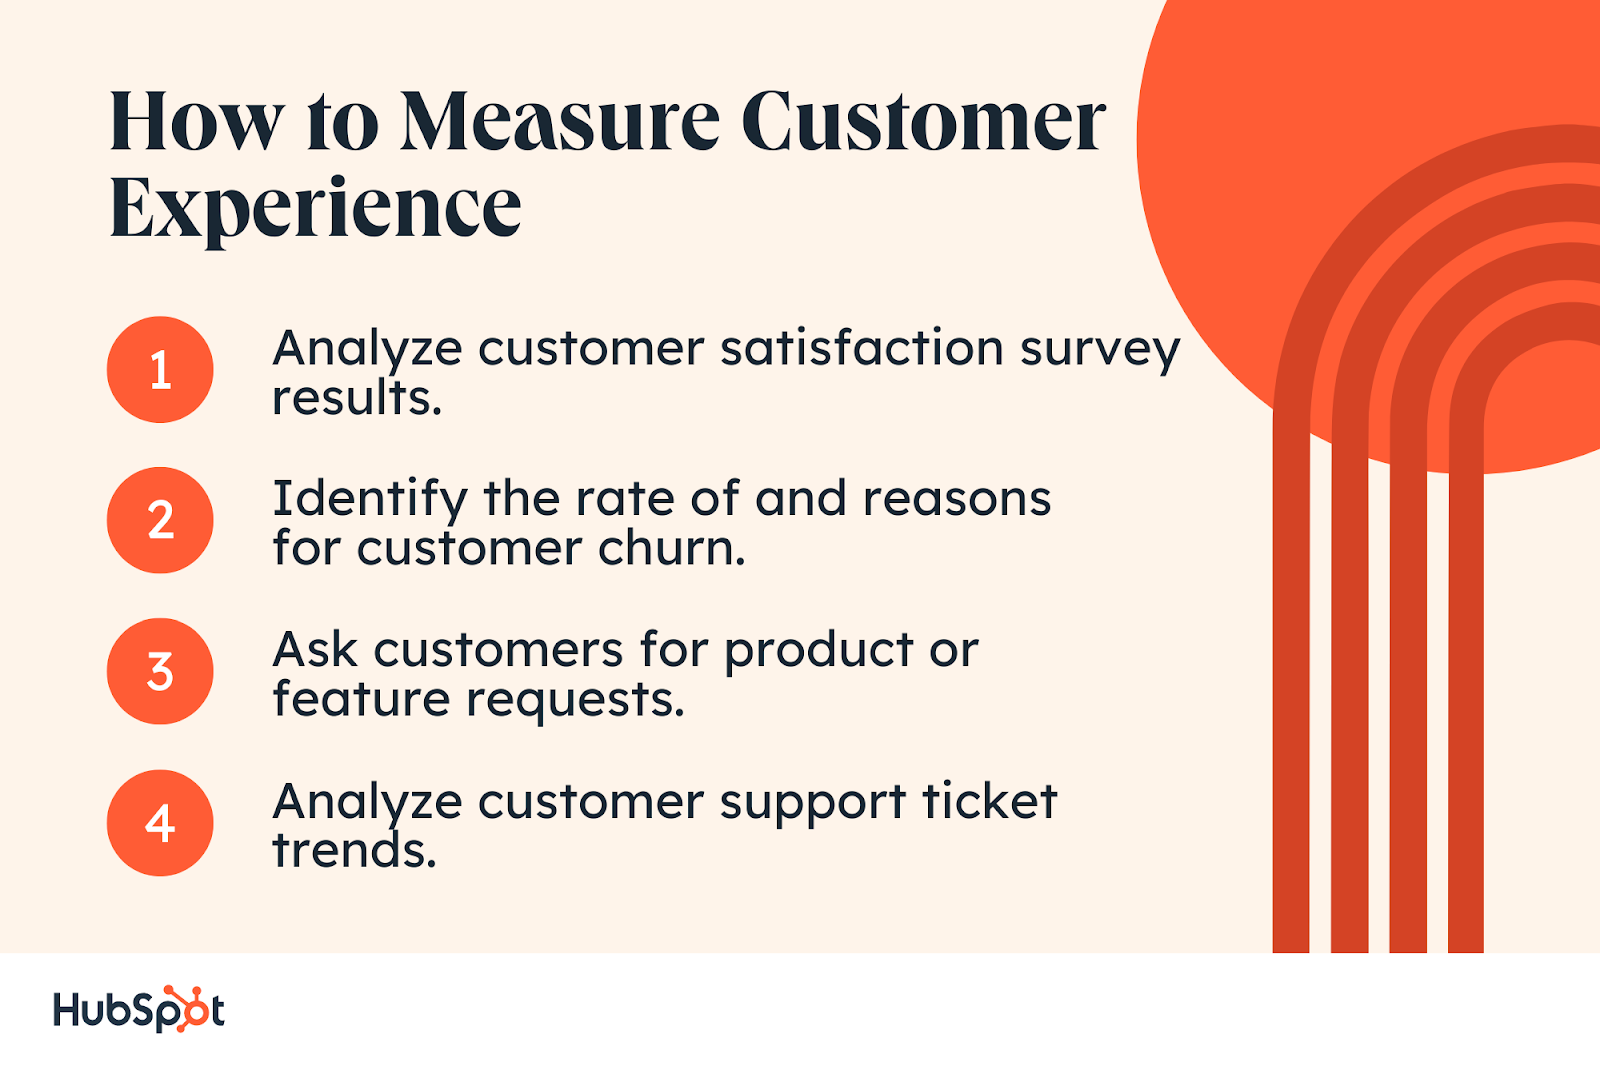 How to Measure Customer Experience. Analyze customer satisfaction survey results. Identify the rate of and reasons for customer churn. Ask customers for product or feature requests. Analyze customer support ticket trends.